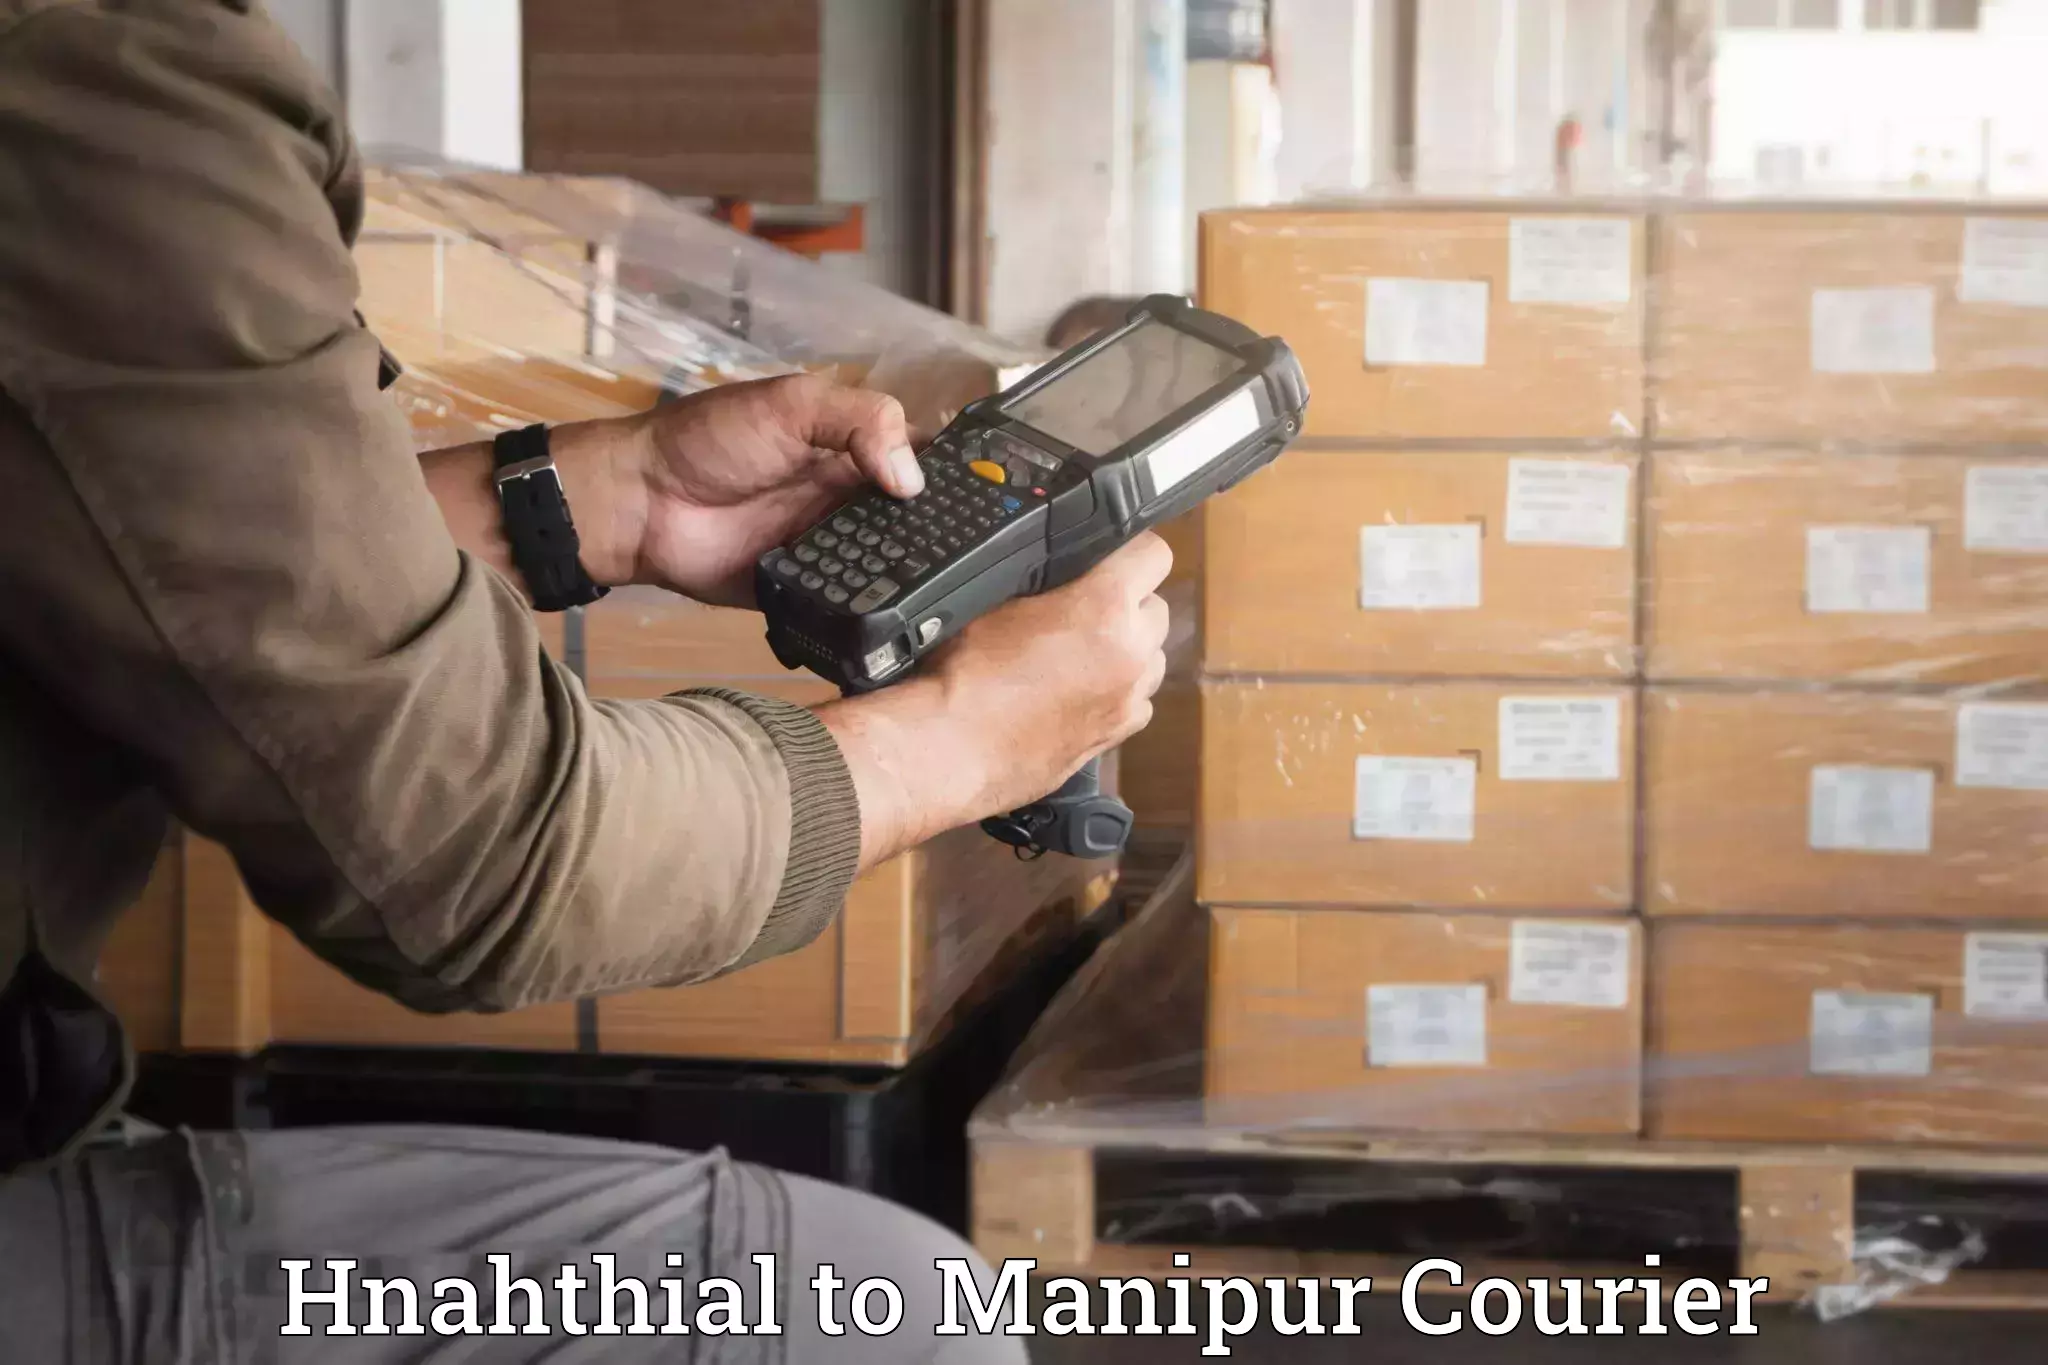 Furniture moving specialists Hnahthial to Manipur